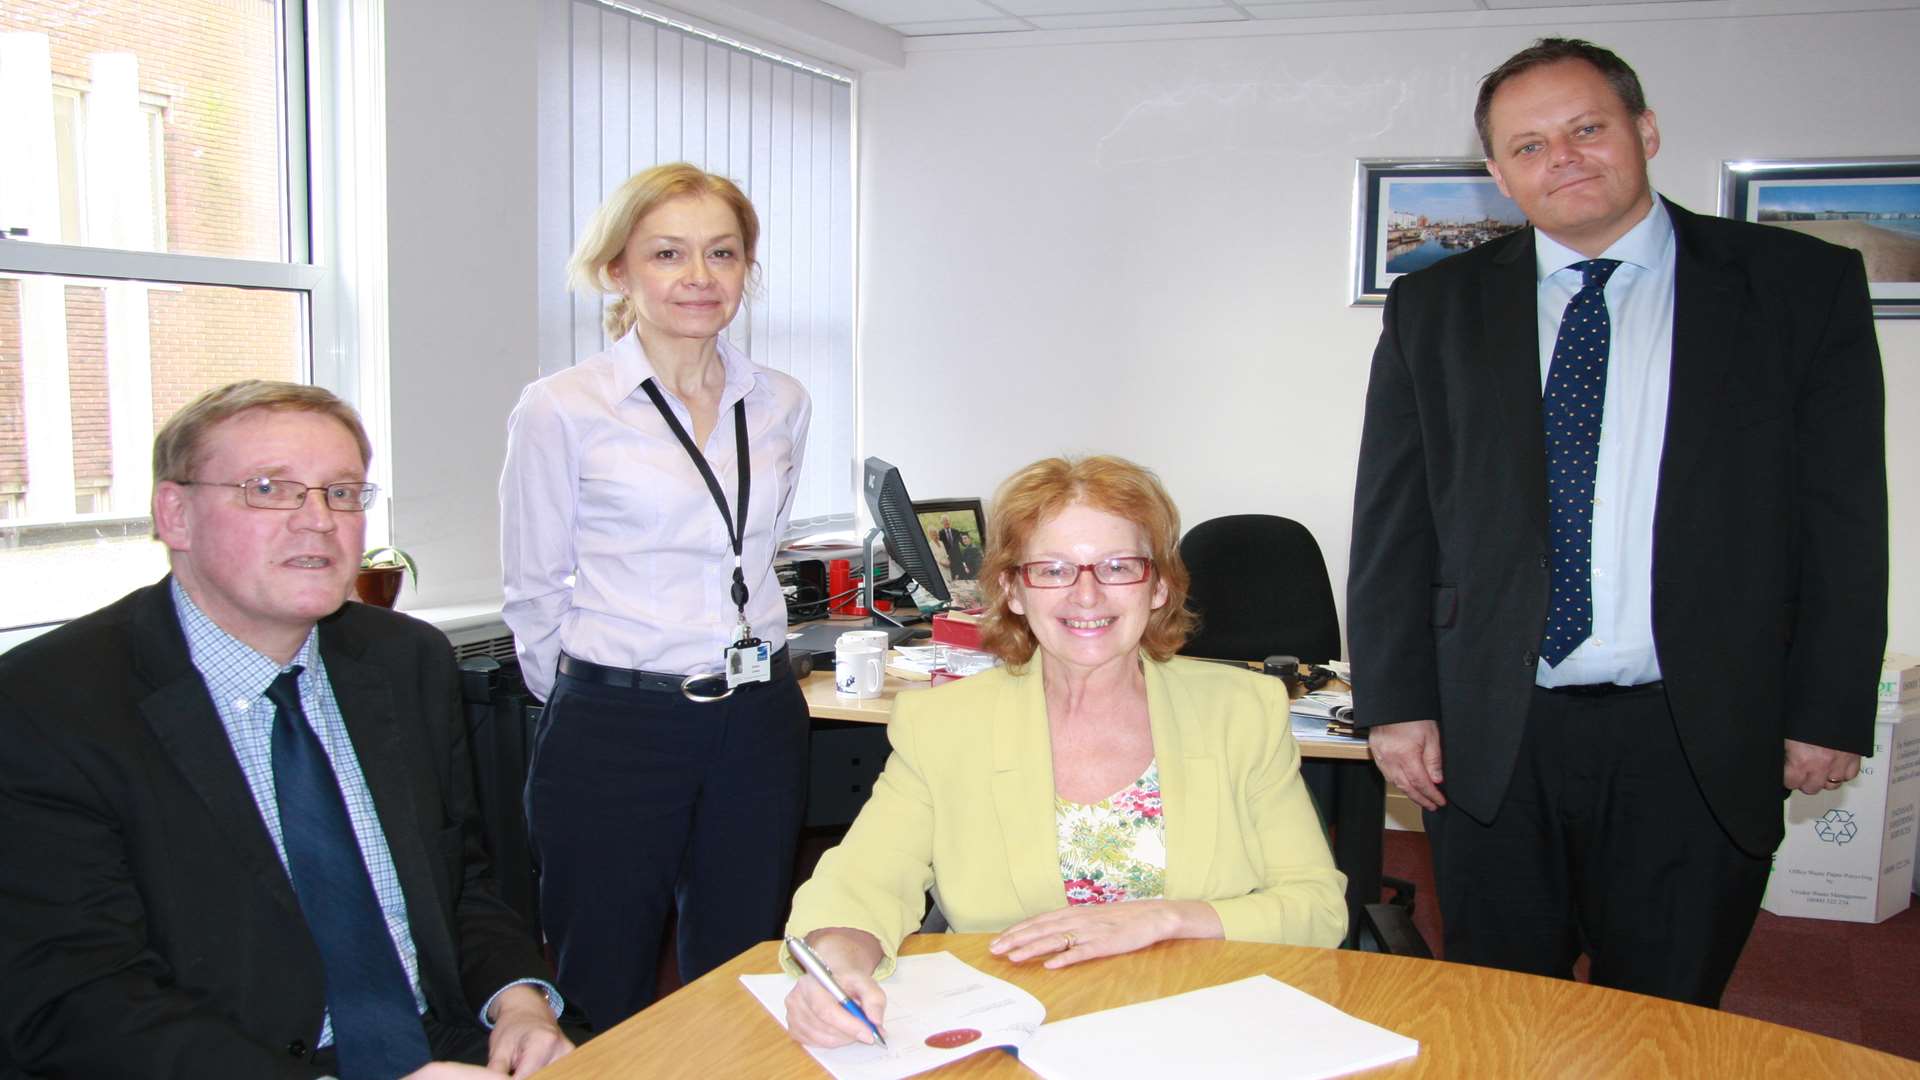 Council leader Iris Johnston signs the contract with Director of Cardy Mike Stannard with Edwina Crowley and Colin Graham